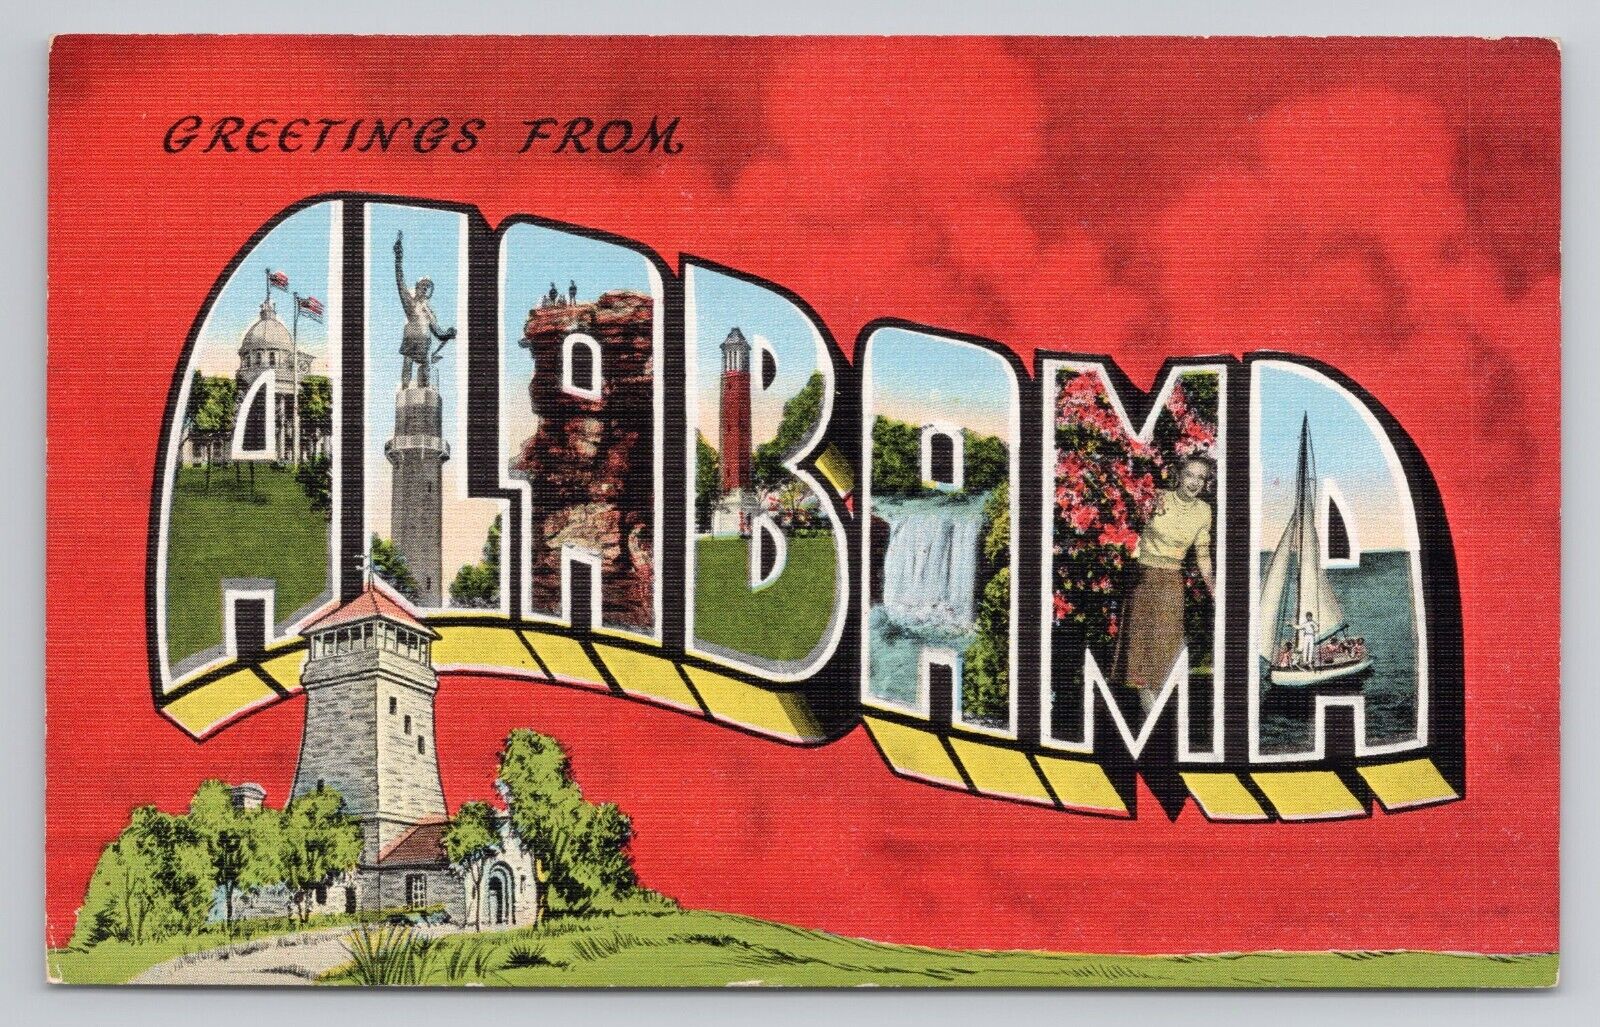 Greetings from Alabama Multi View Large Letter Vintage Linen Postcard